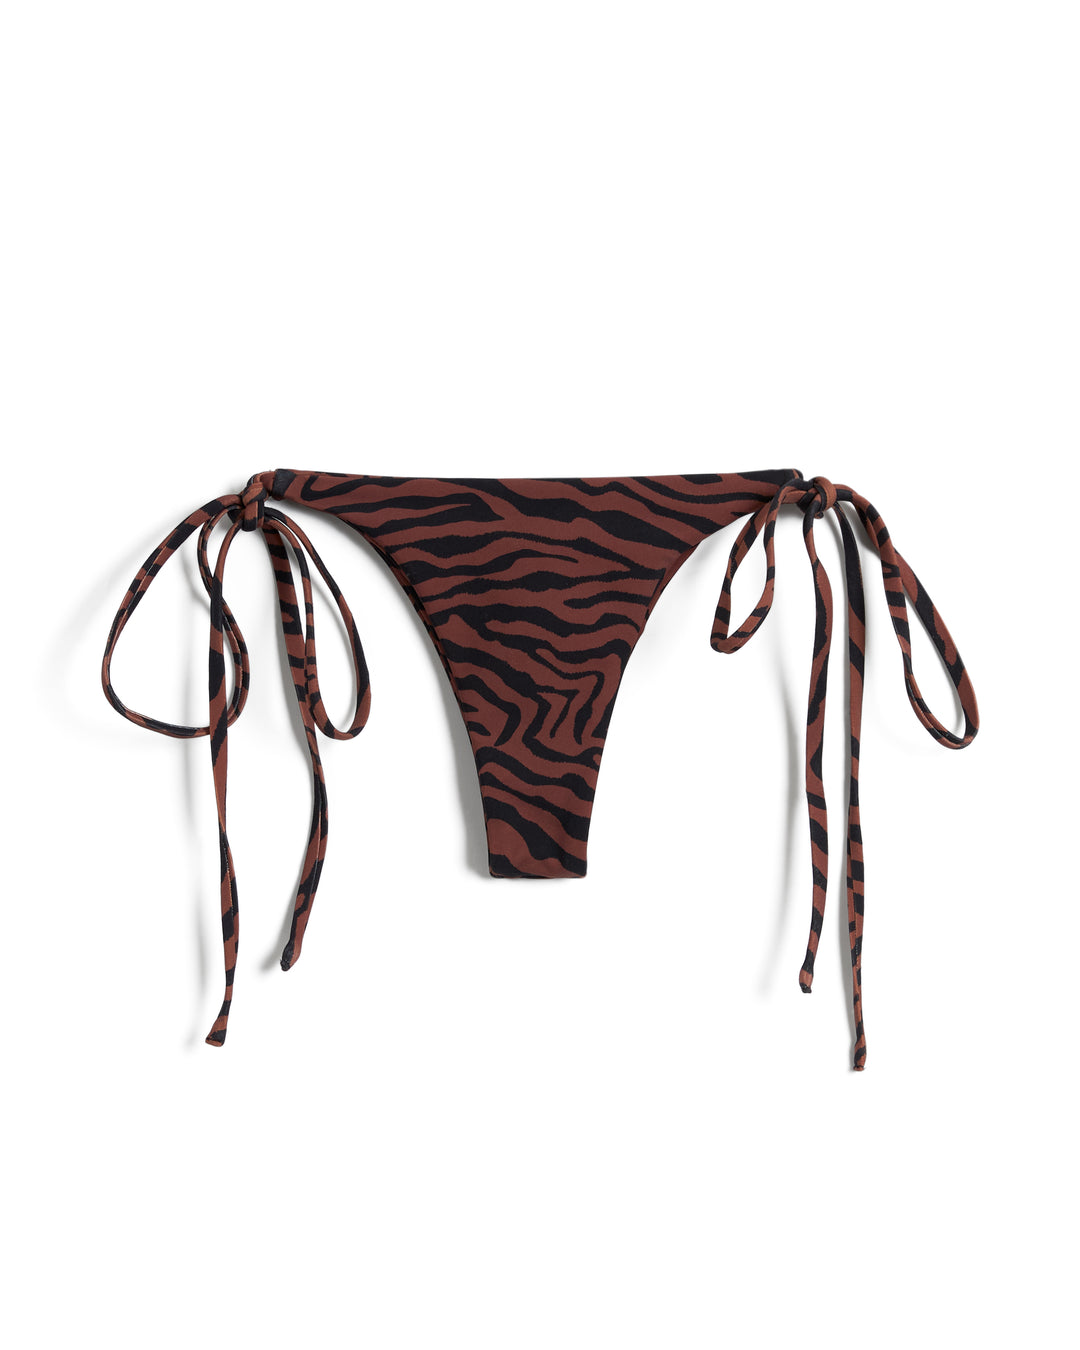 A pair of **The Kokomo Bottom - Onyx** by **Dandy Del Mar** with a brown and black zebra print pattern, featuring adjustable side ties and skimpy coverage, made from recycled nylon.